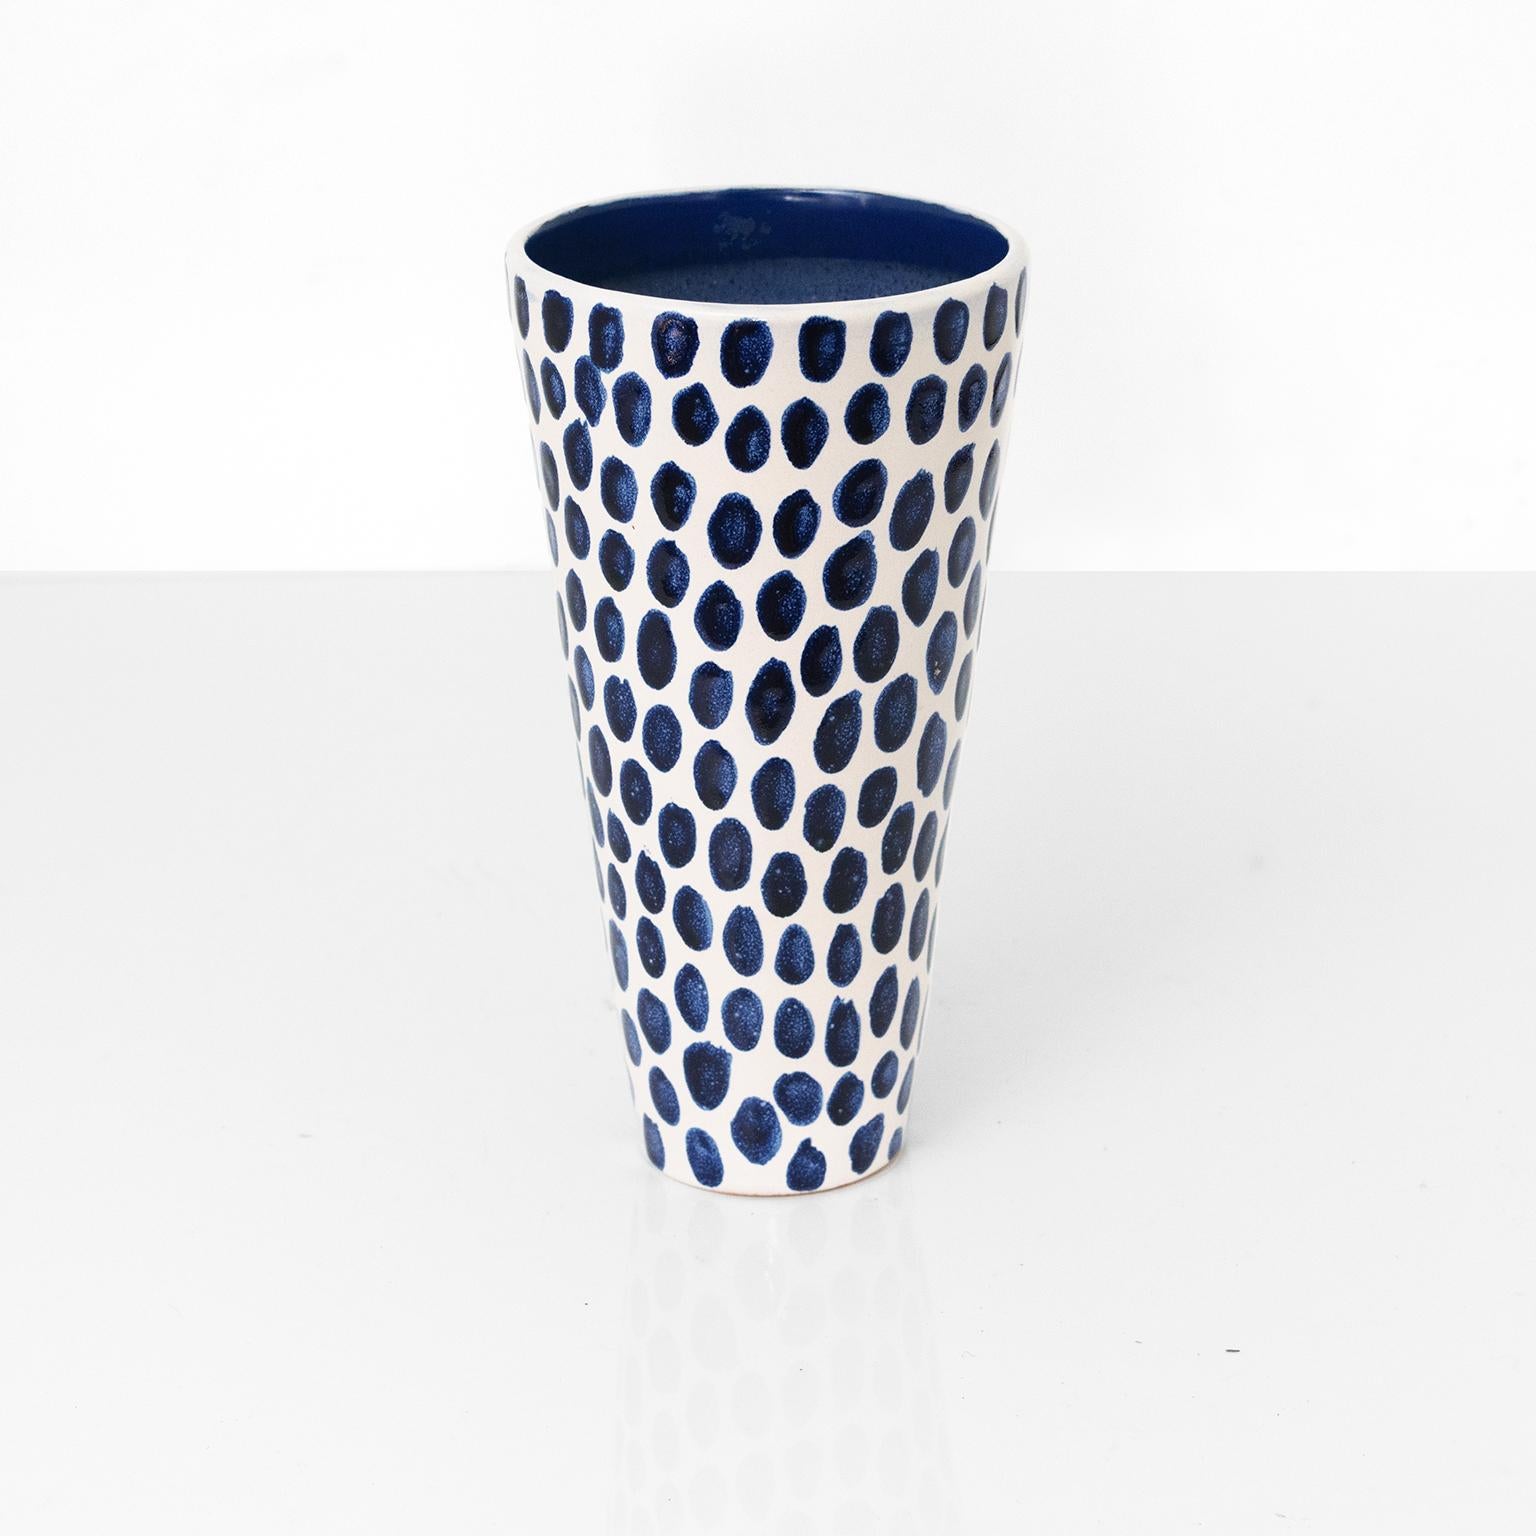 Vicke Lindstrand Spotted Vase Upsala Ekeby, Scandinavian Modern In Good Condition For Sale In New York, NY